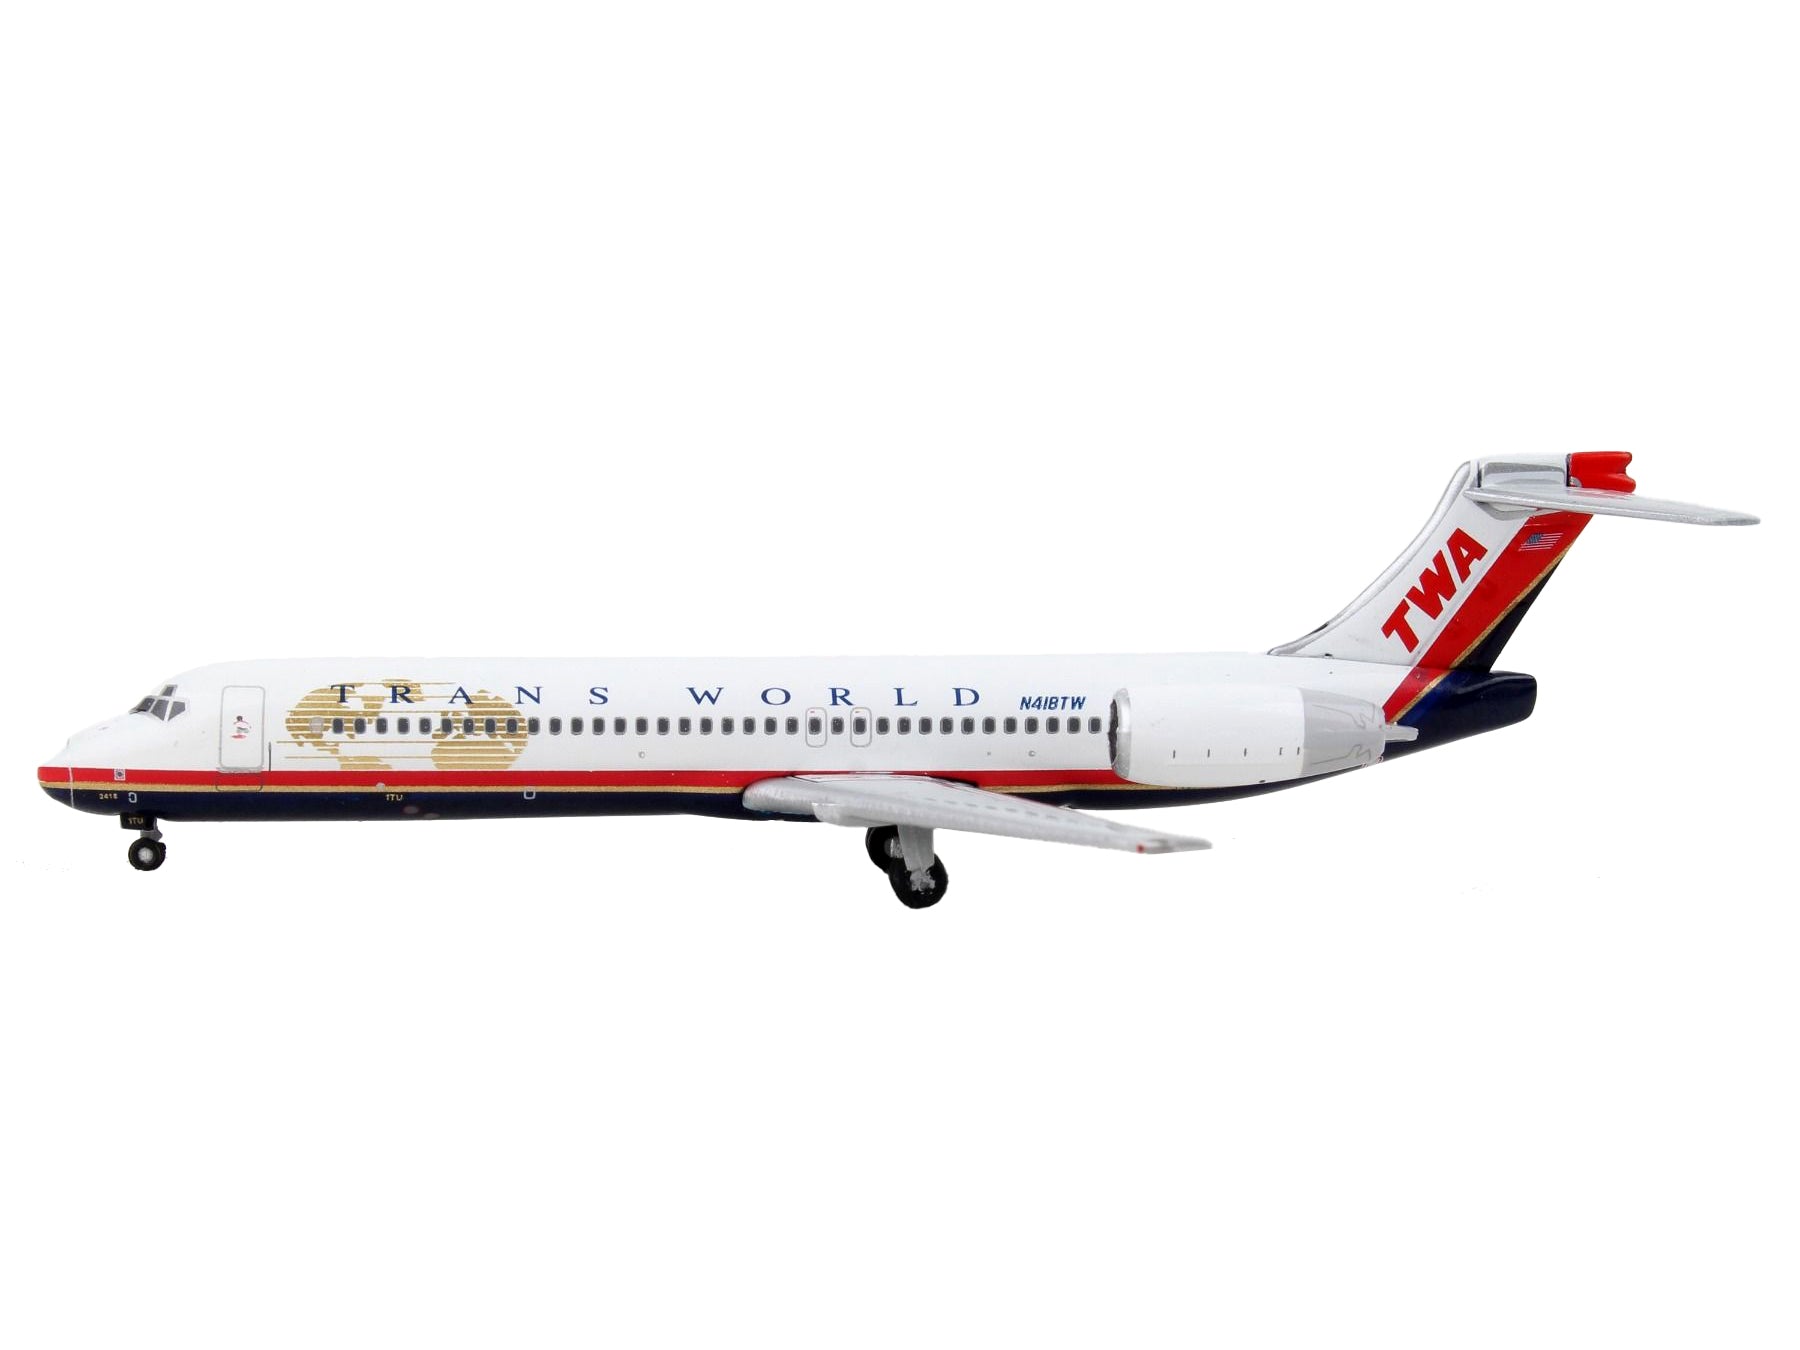 Boeing 717-200 Commercial Aircraft "Trans World Airlines" White with Red Stripes 1/400 Diecast Model Airplane by GeminiJets